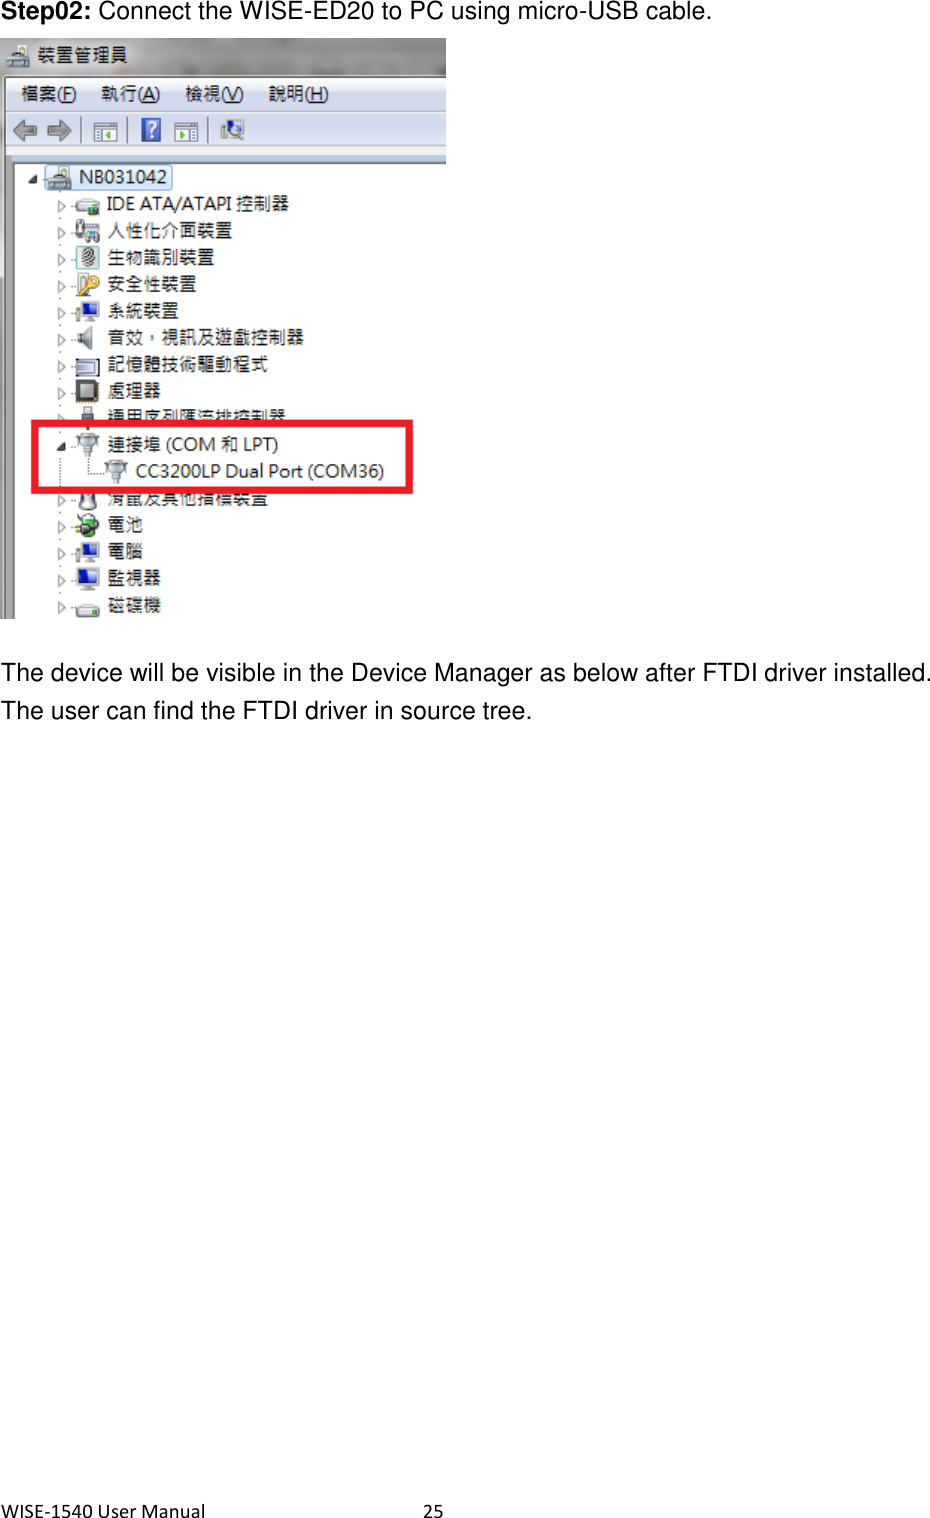 WISE-1540 User Manual  25 Step02: Connect the WISE-ED20 to PC using micro-USB cable.  The device will be visible in the Device Manager as below after FTDI driver installed. The user can find the FTDI driver in source tree.      